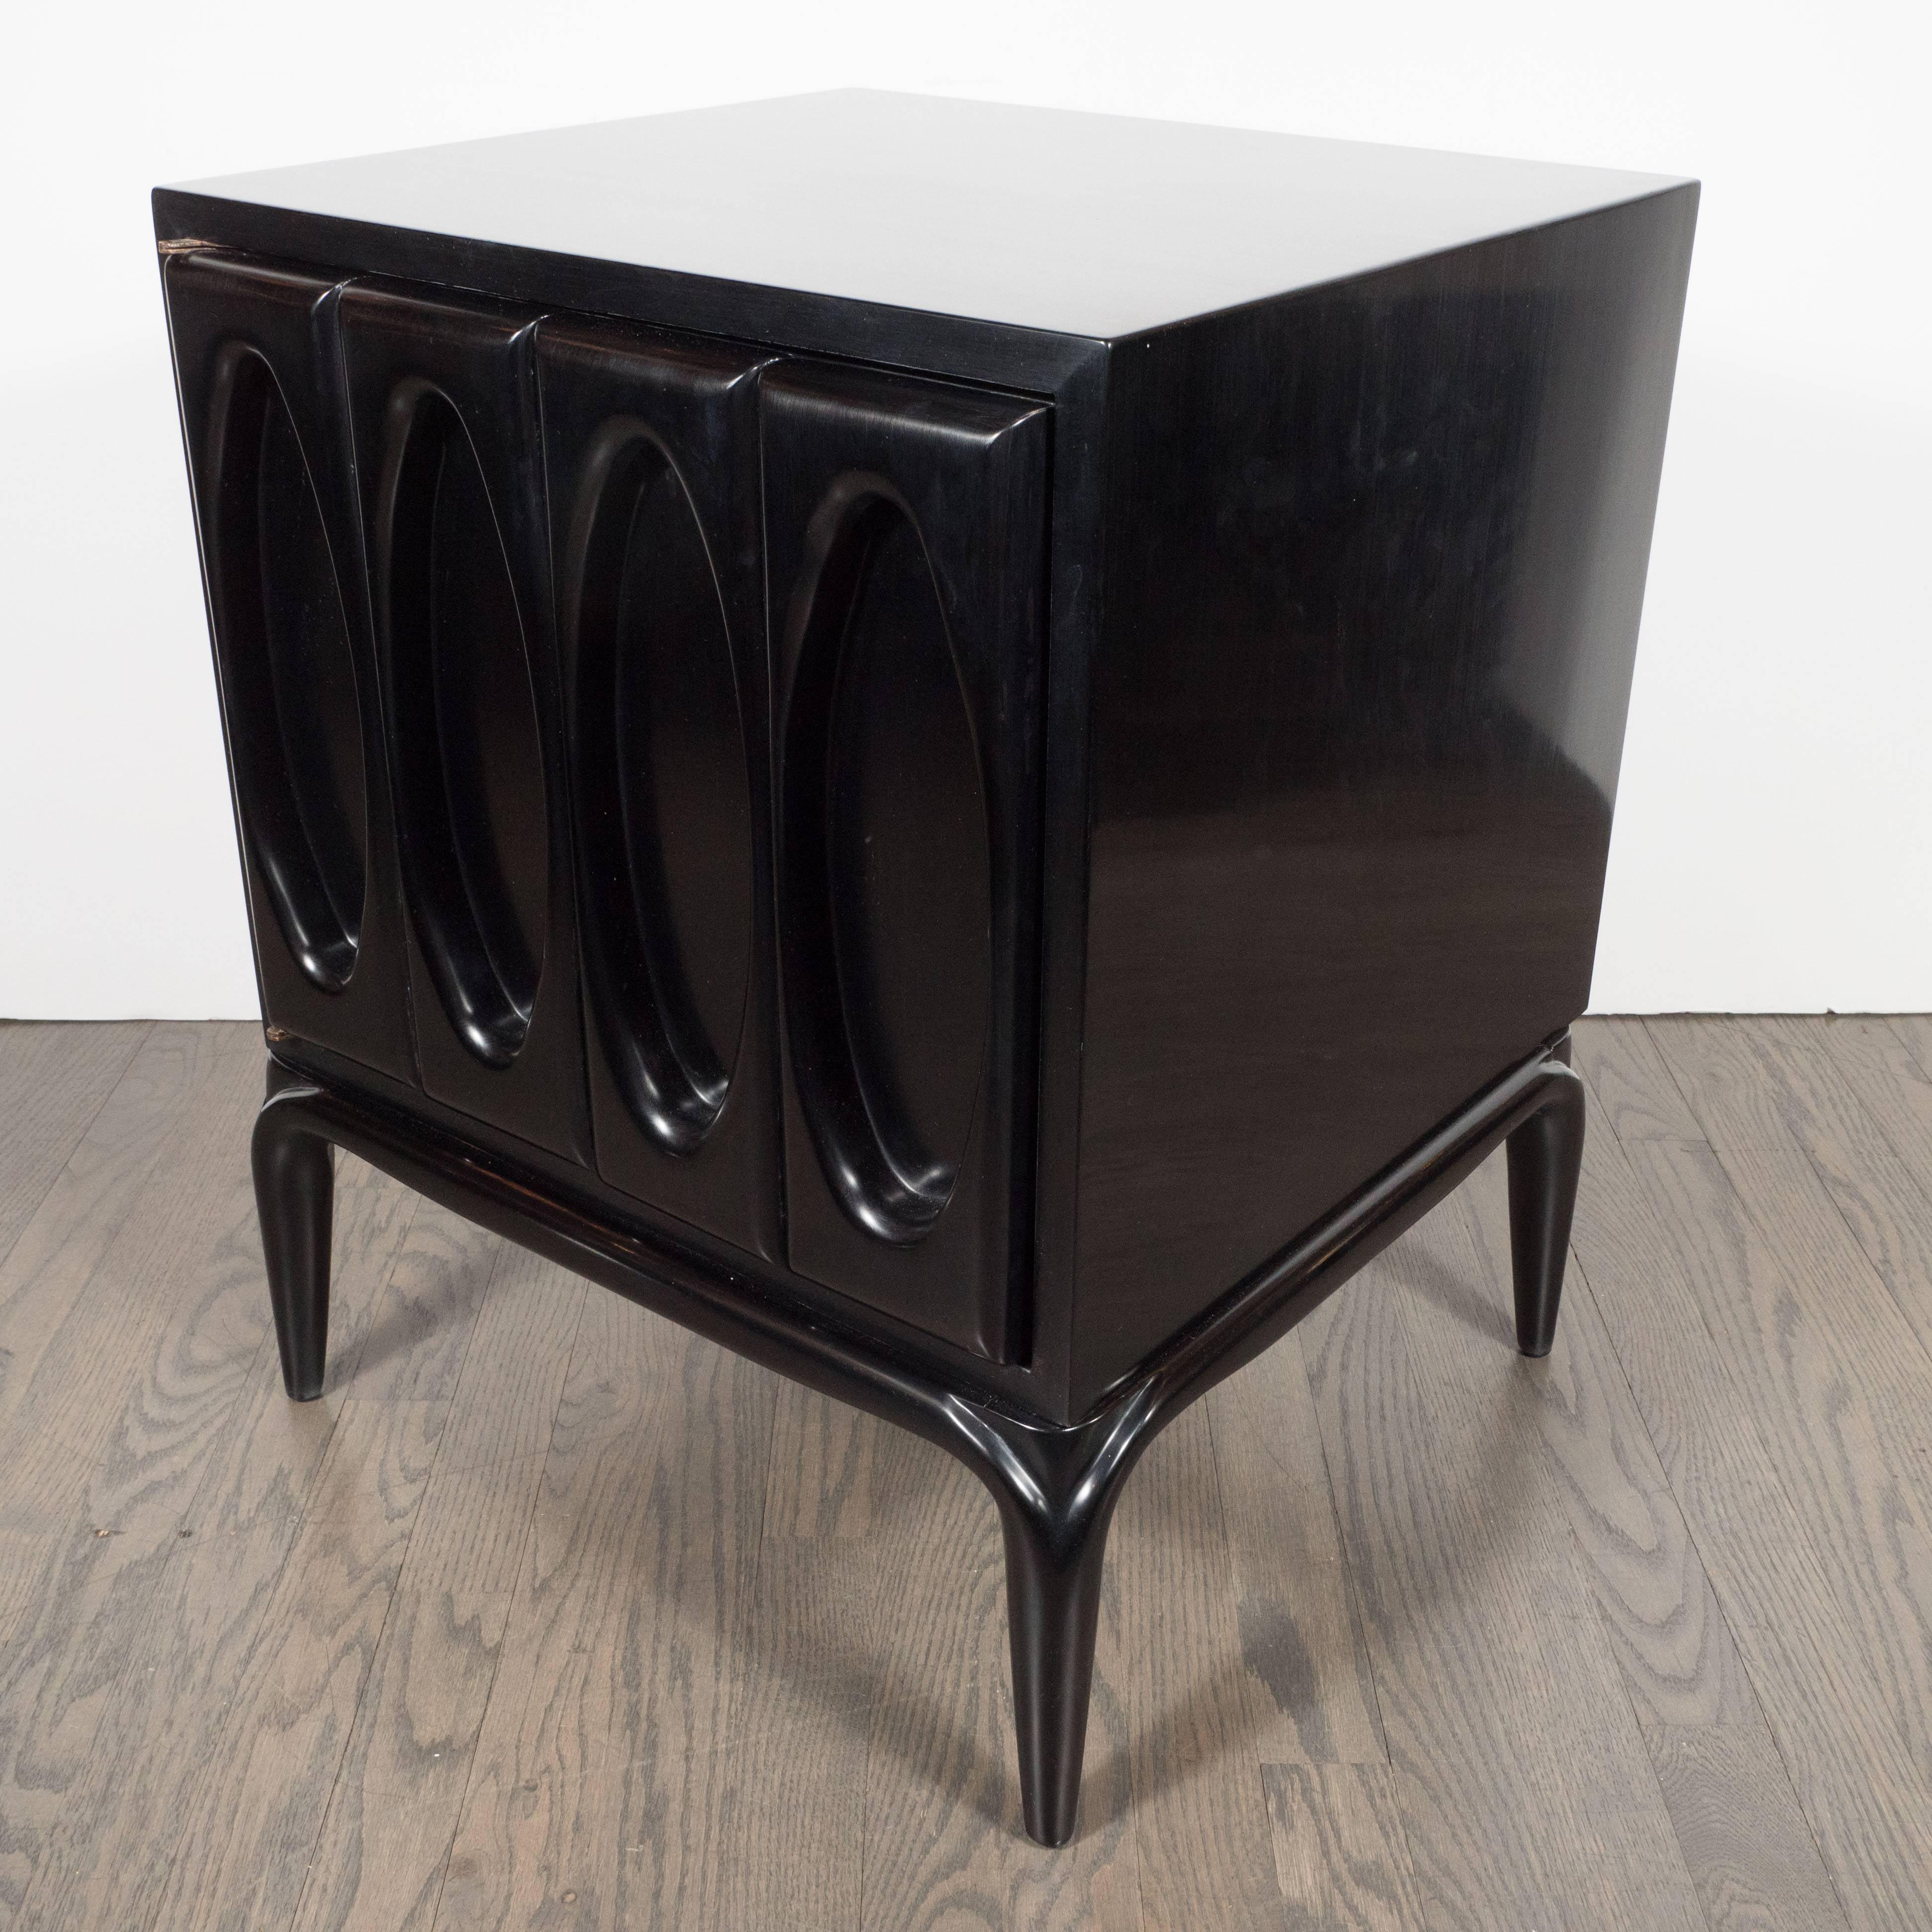 Mid-Century Modern Sculptural Pair of Walnut Nightstands or End Tables with Geometric Details